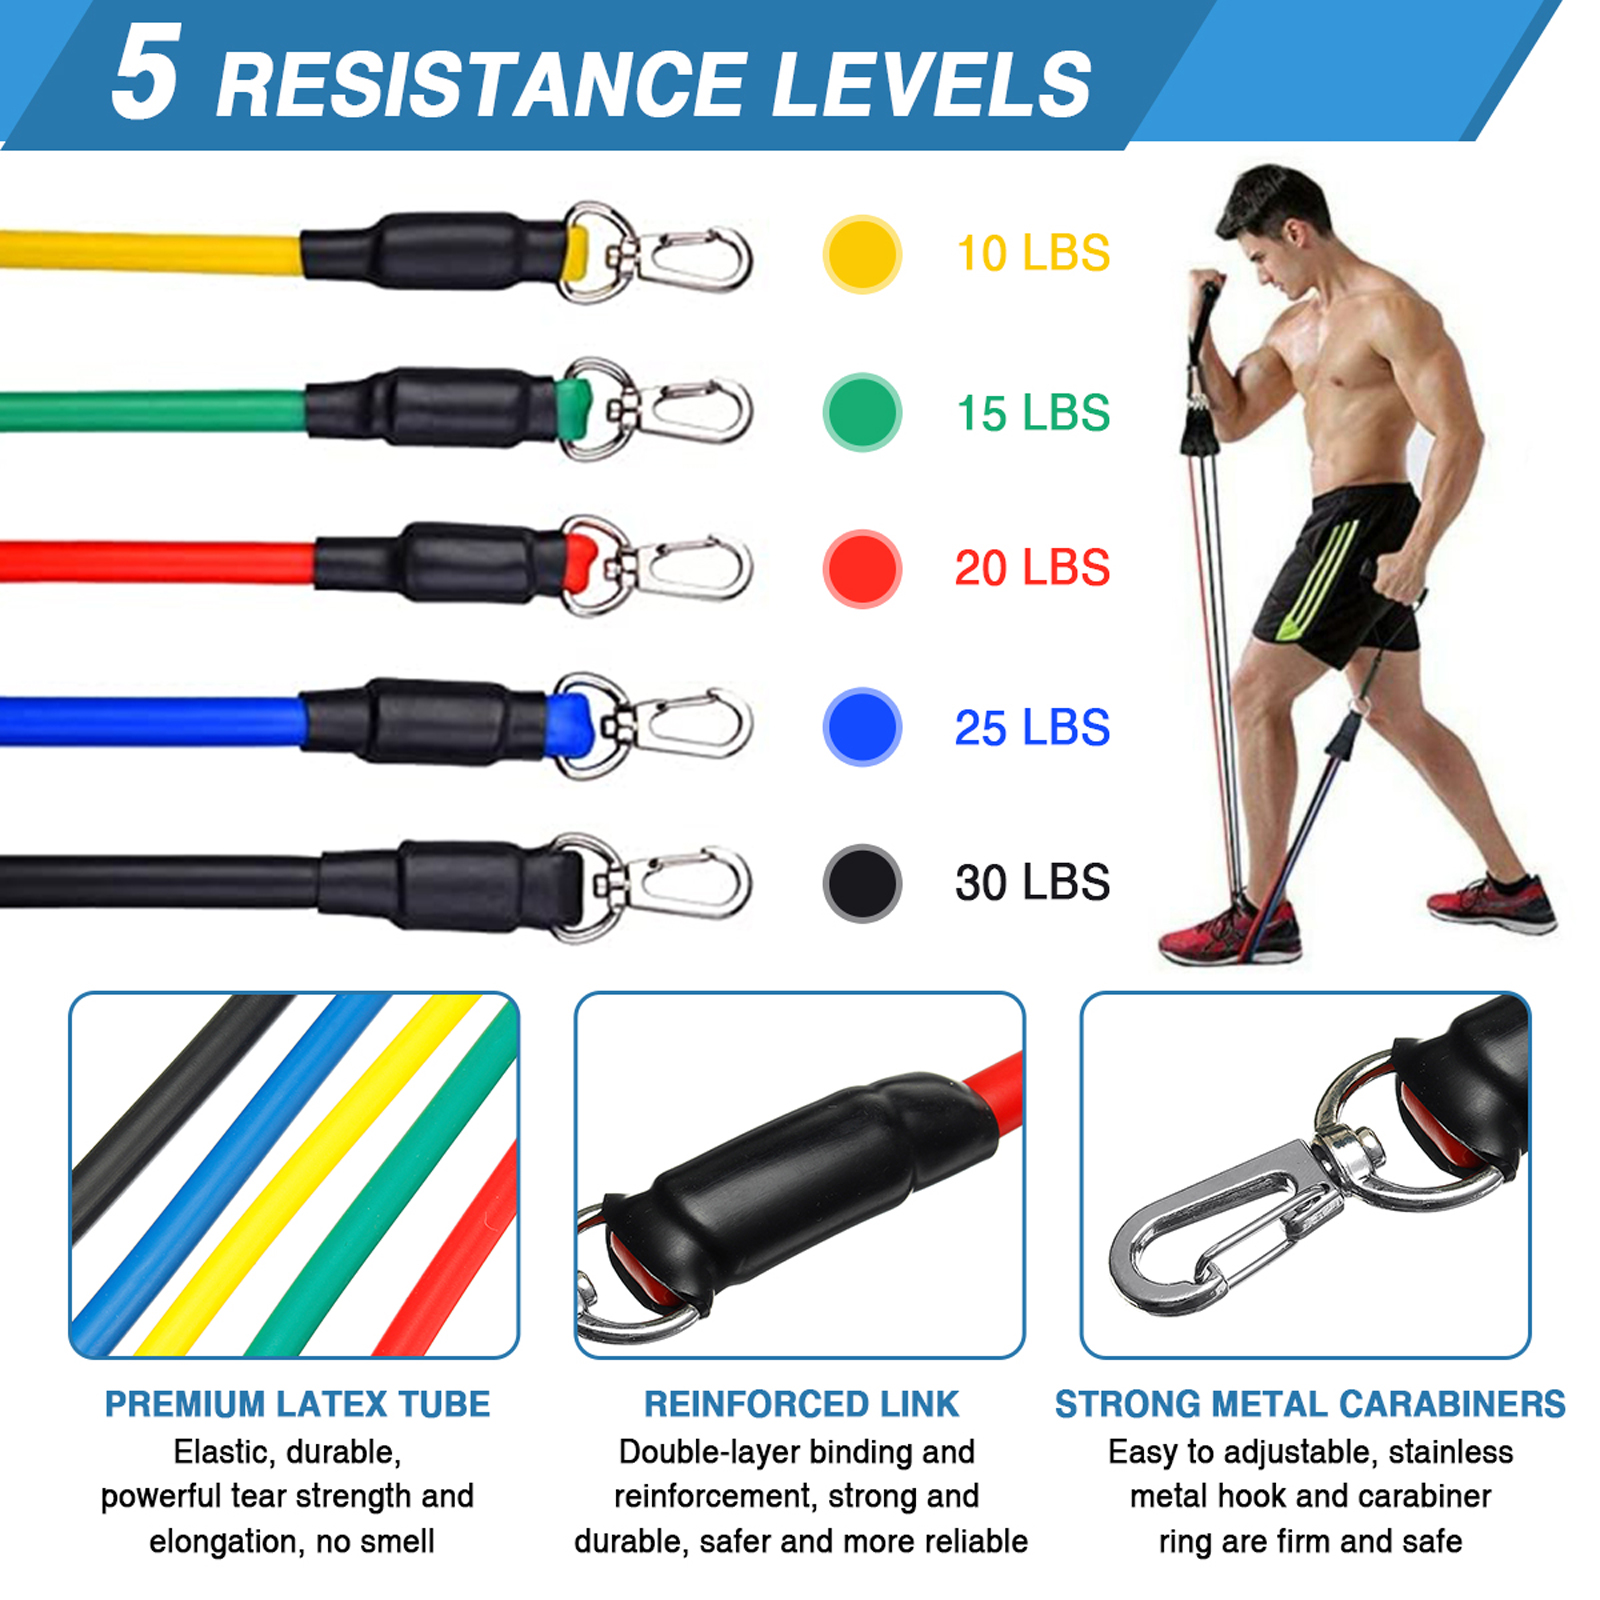 11-Pcs-Fitness-Resistance-Bands-with-Door-Anchor-Legs-Ankle-Straps-Carry-Bag-for-Resistance-Training-1883758-3